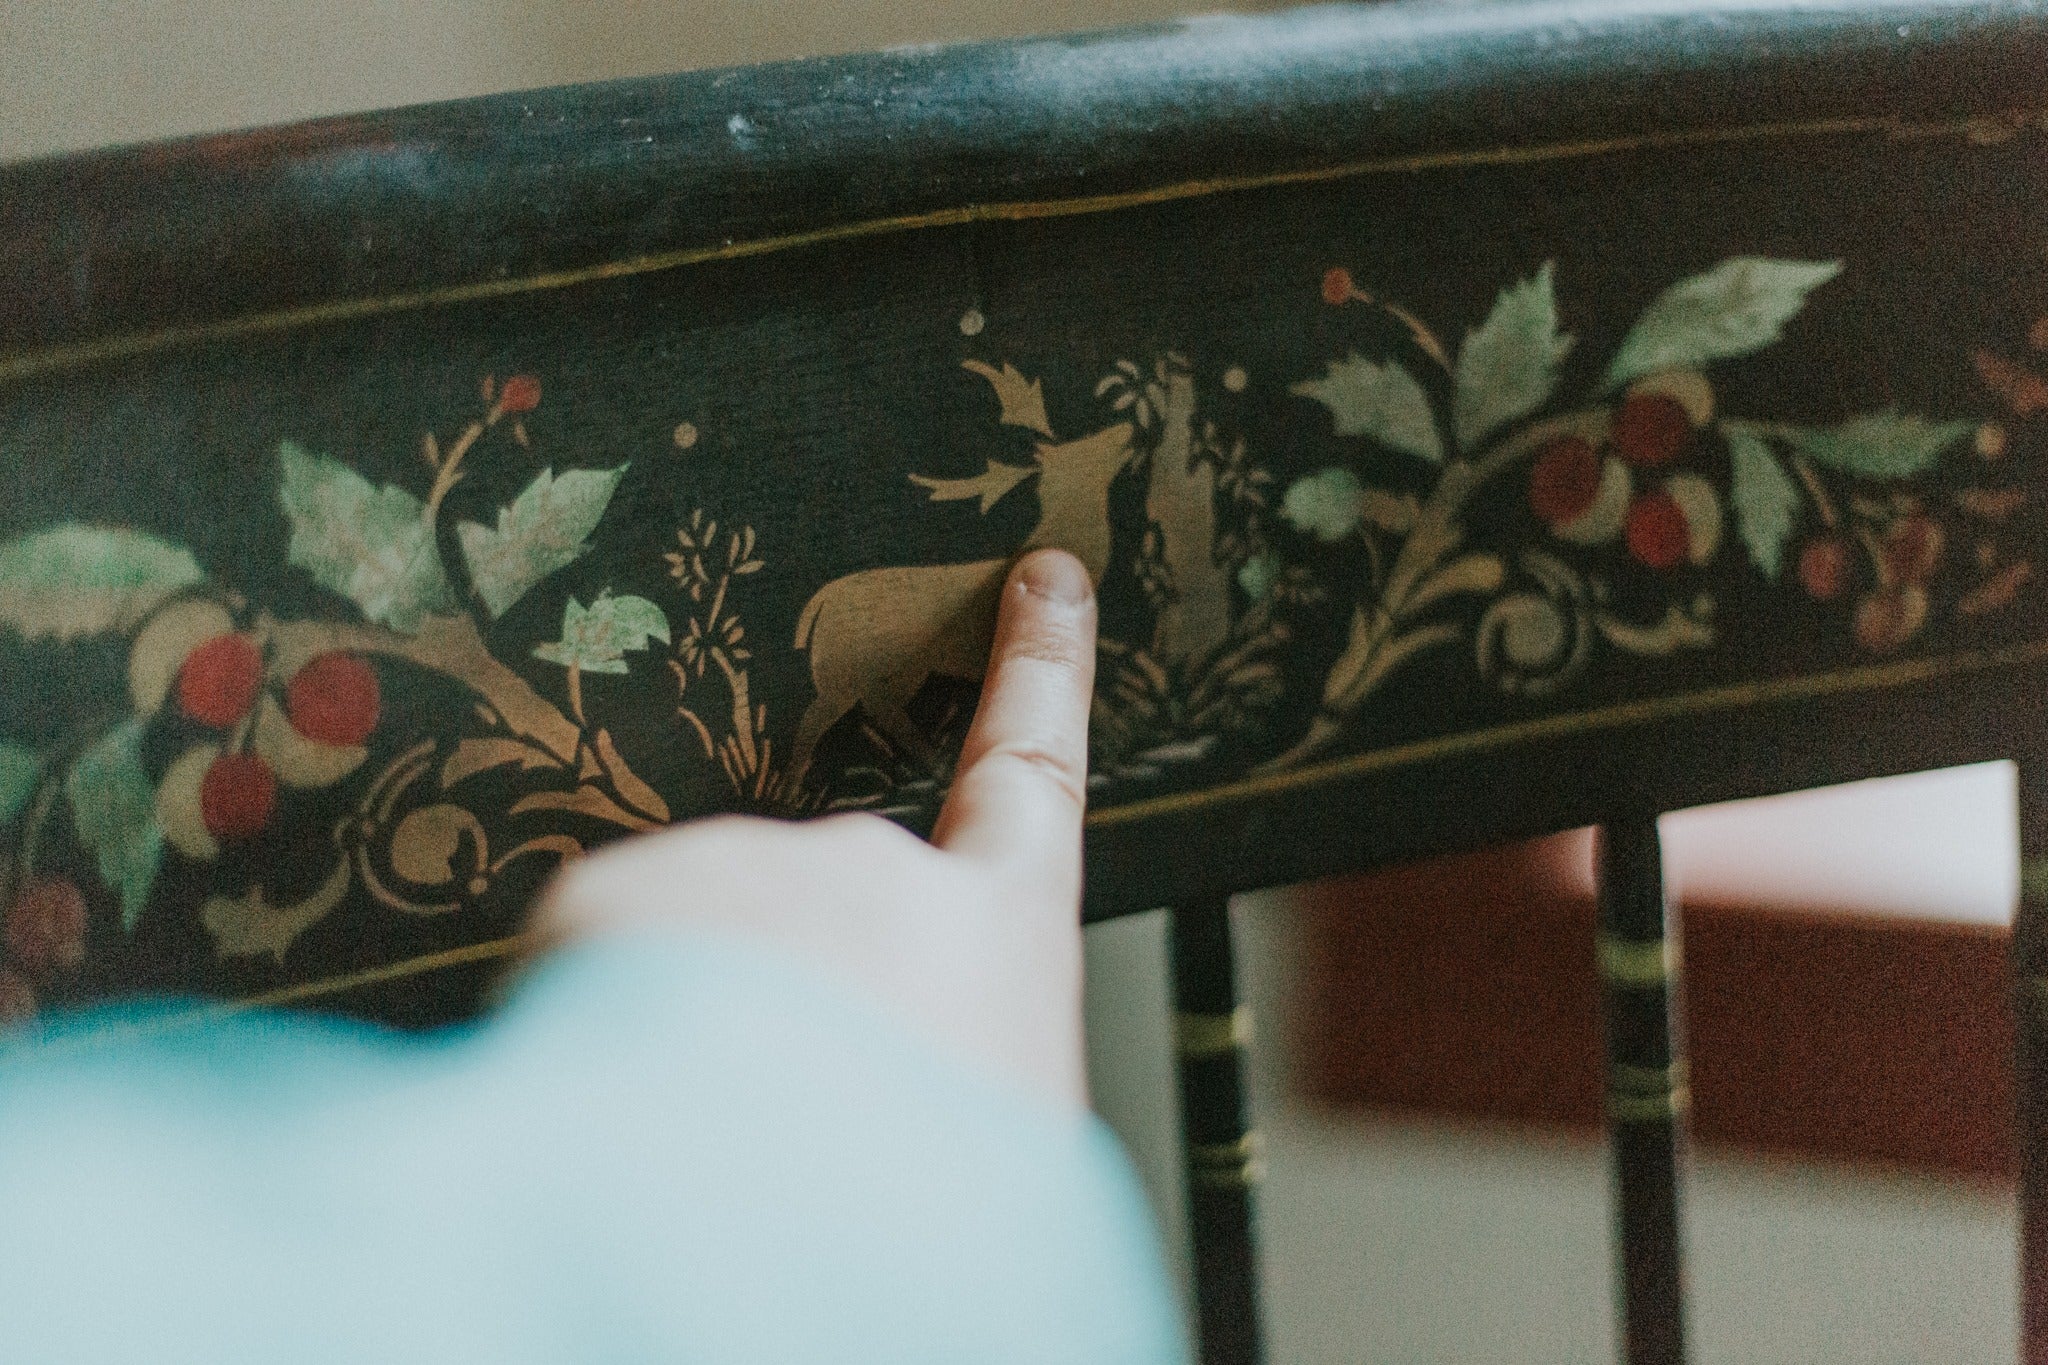 A finger points to a hand painted back of a chair, featuring a golden deer, some light green leaves and red raspberries